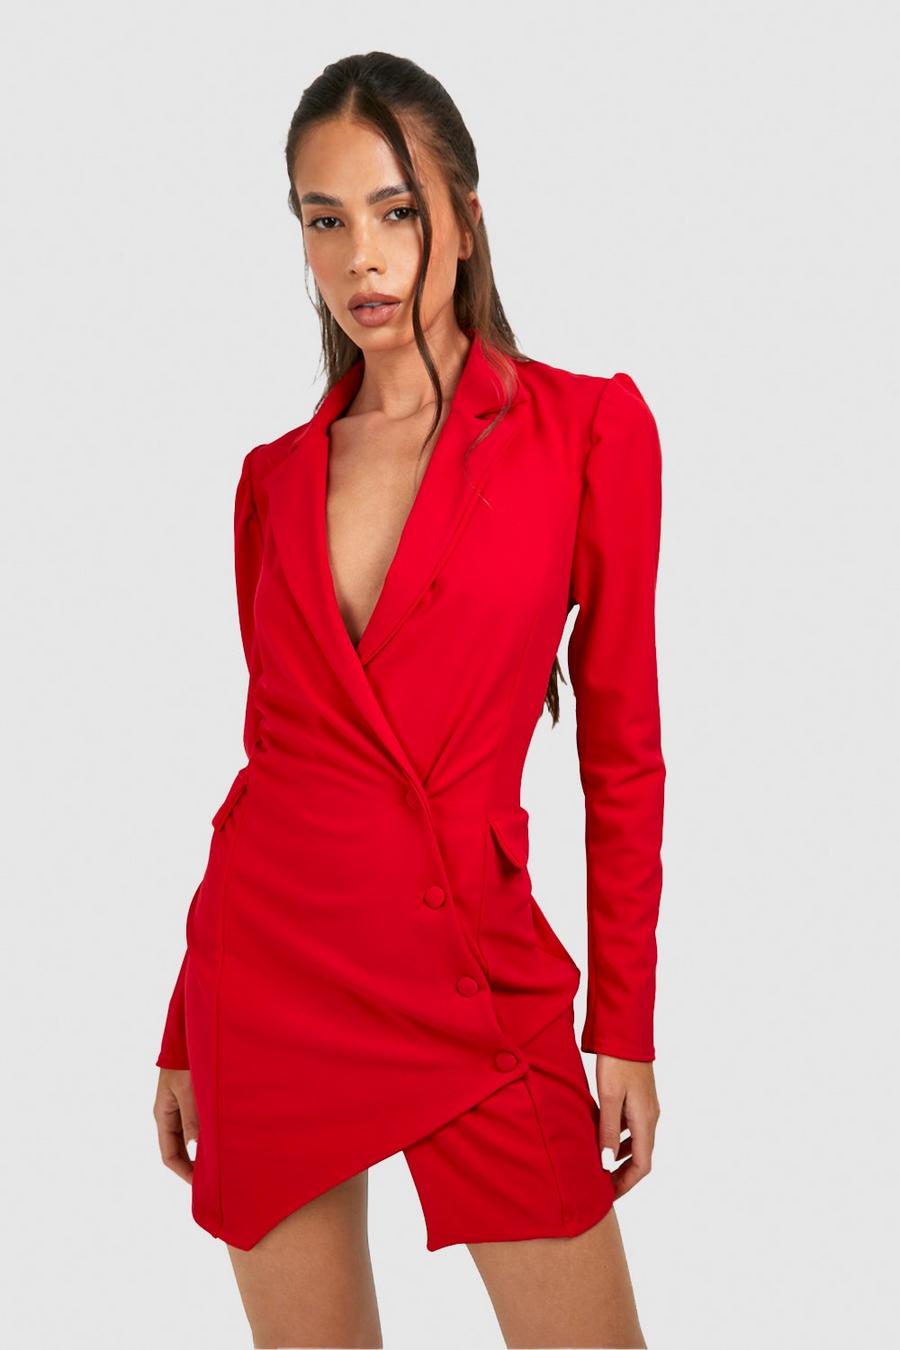 Red Race Day Dresses